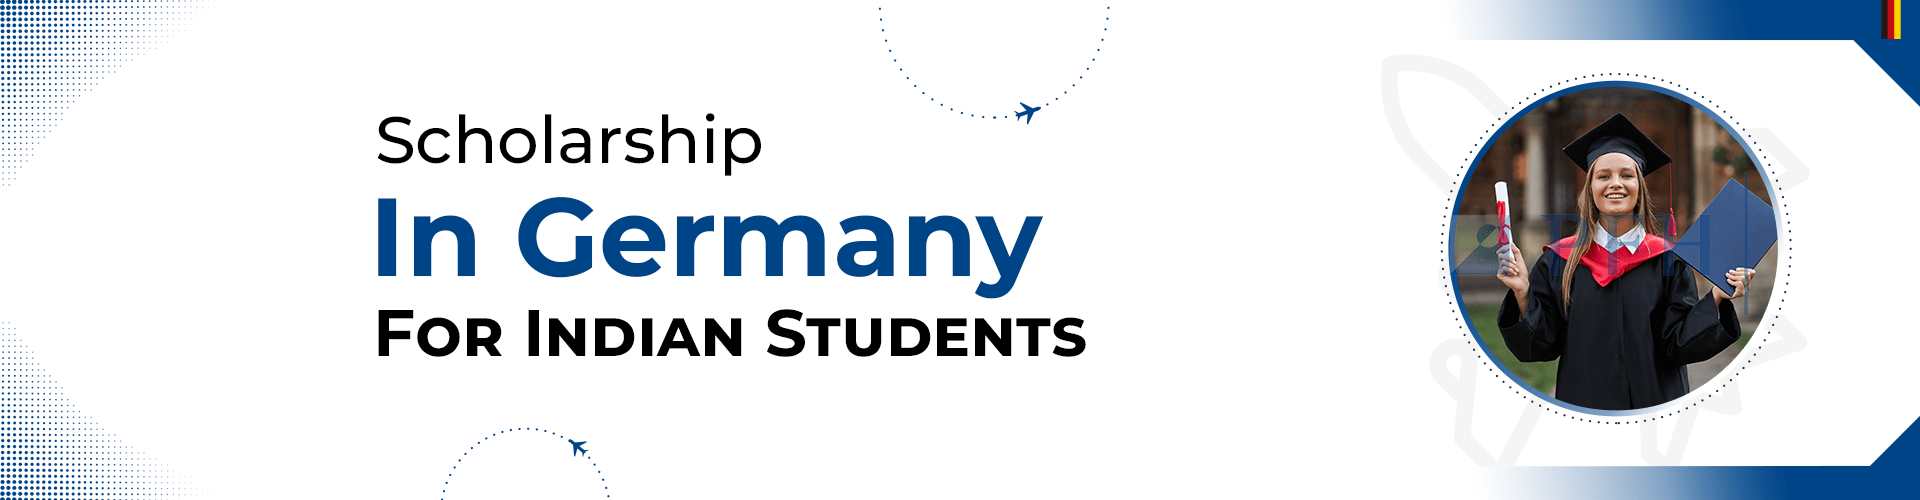 Scholarships in Germany for Indian Students